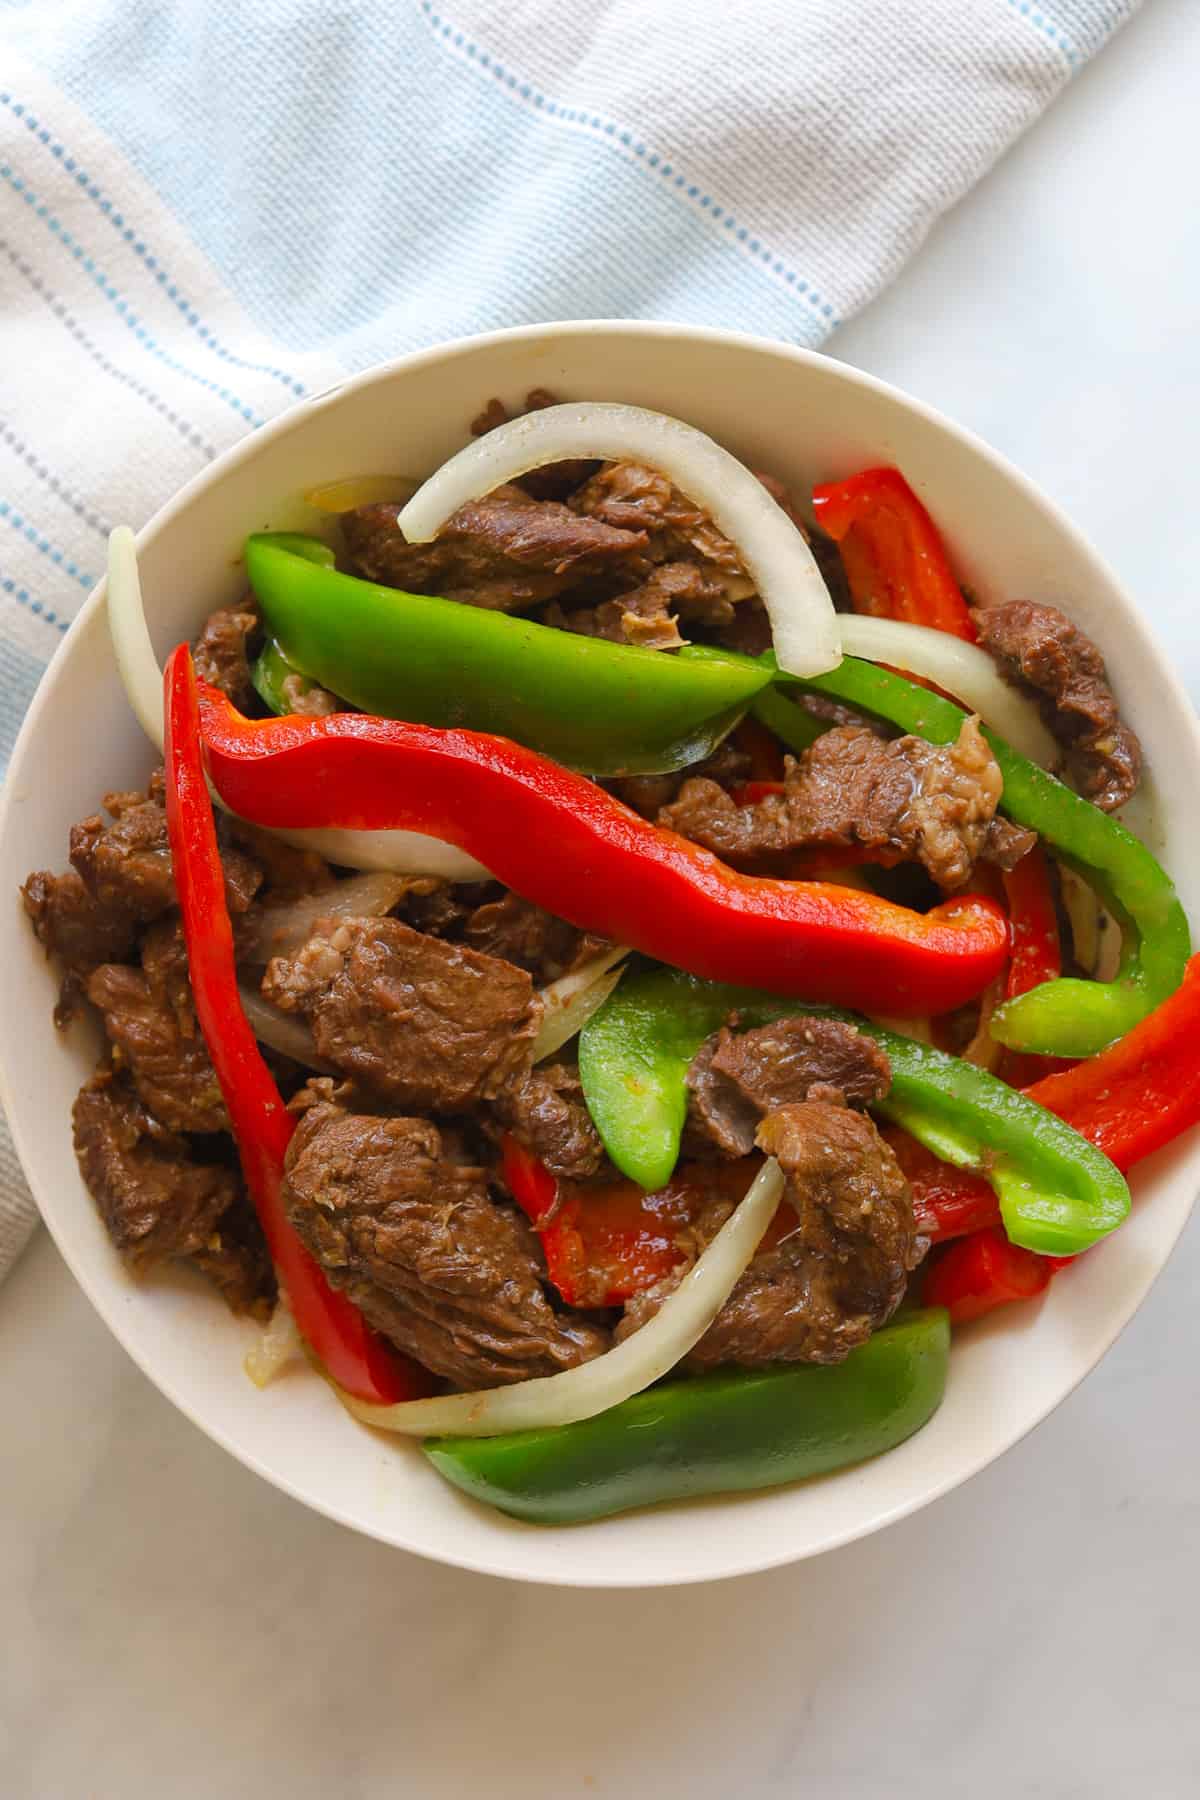 Plate with beef, sliced red and green bell peppers and white onions.